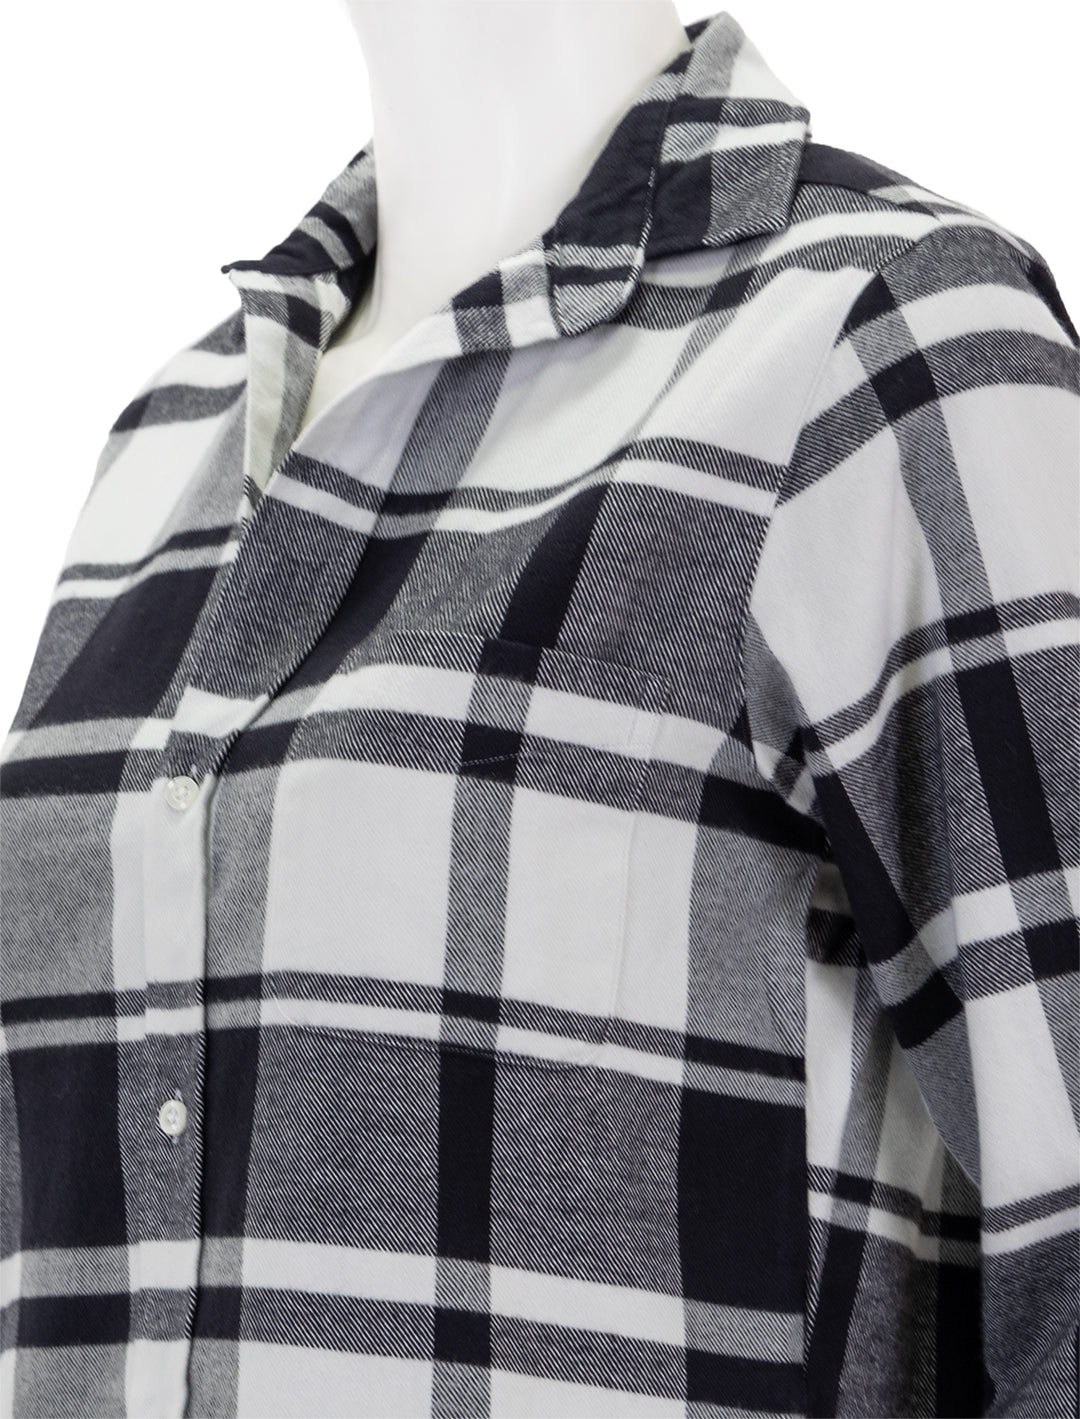 Close-up view of Frank & Eileen's silvio in large black and white plaid.